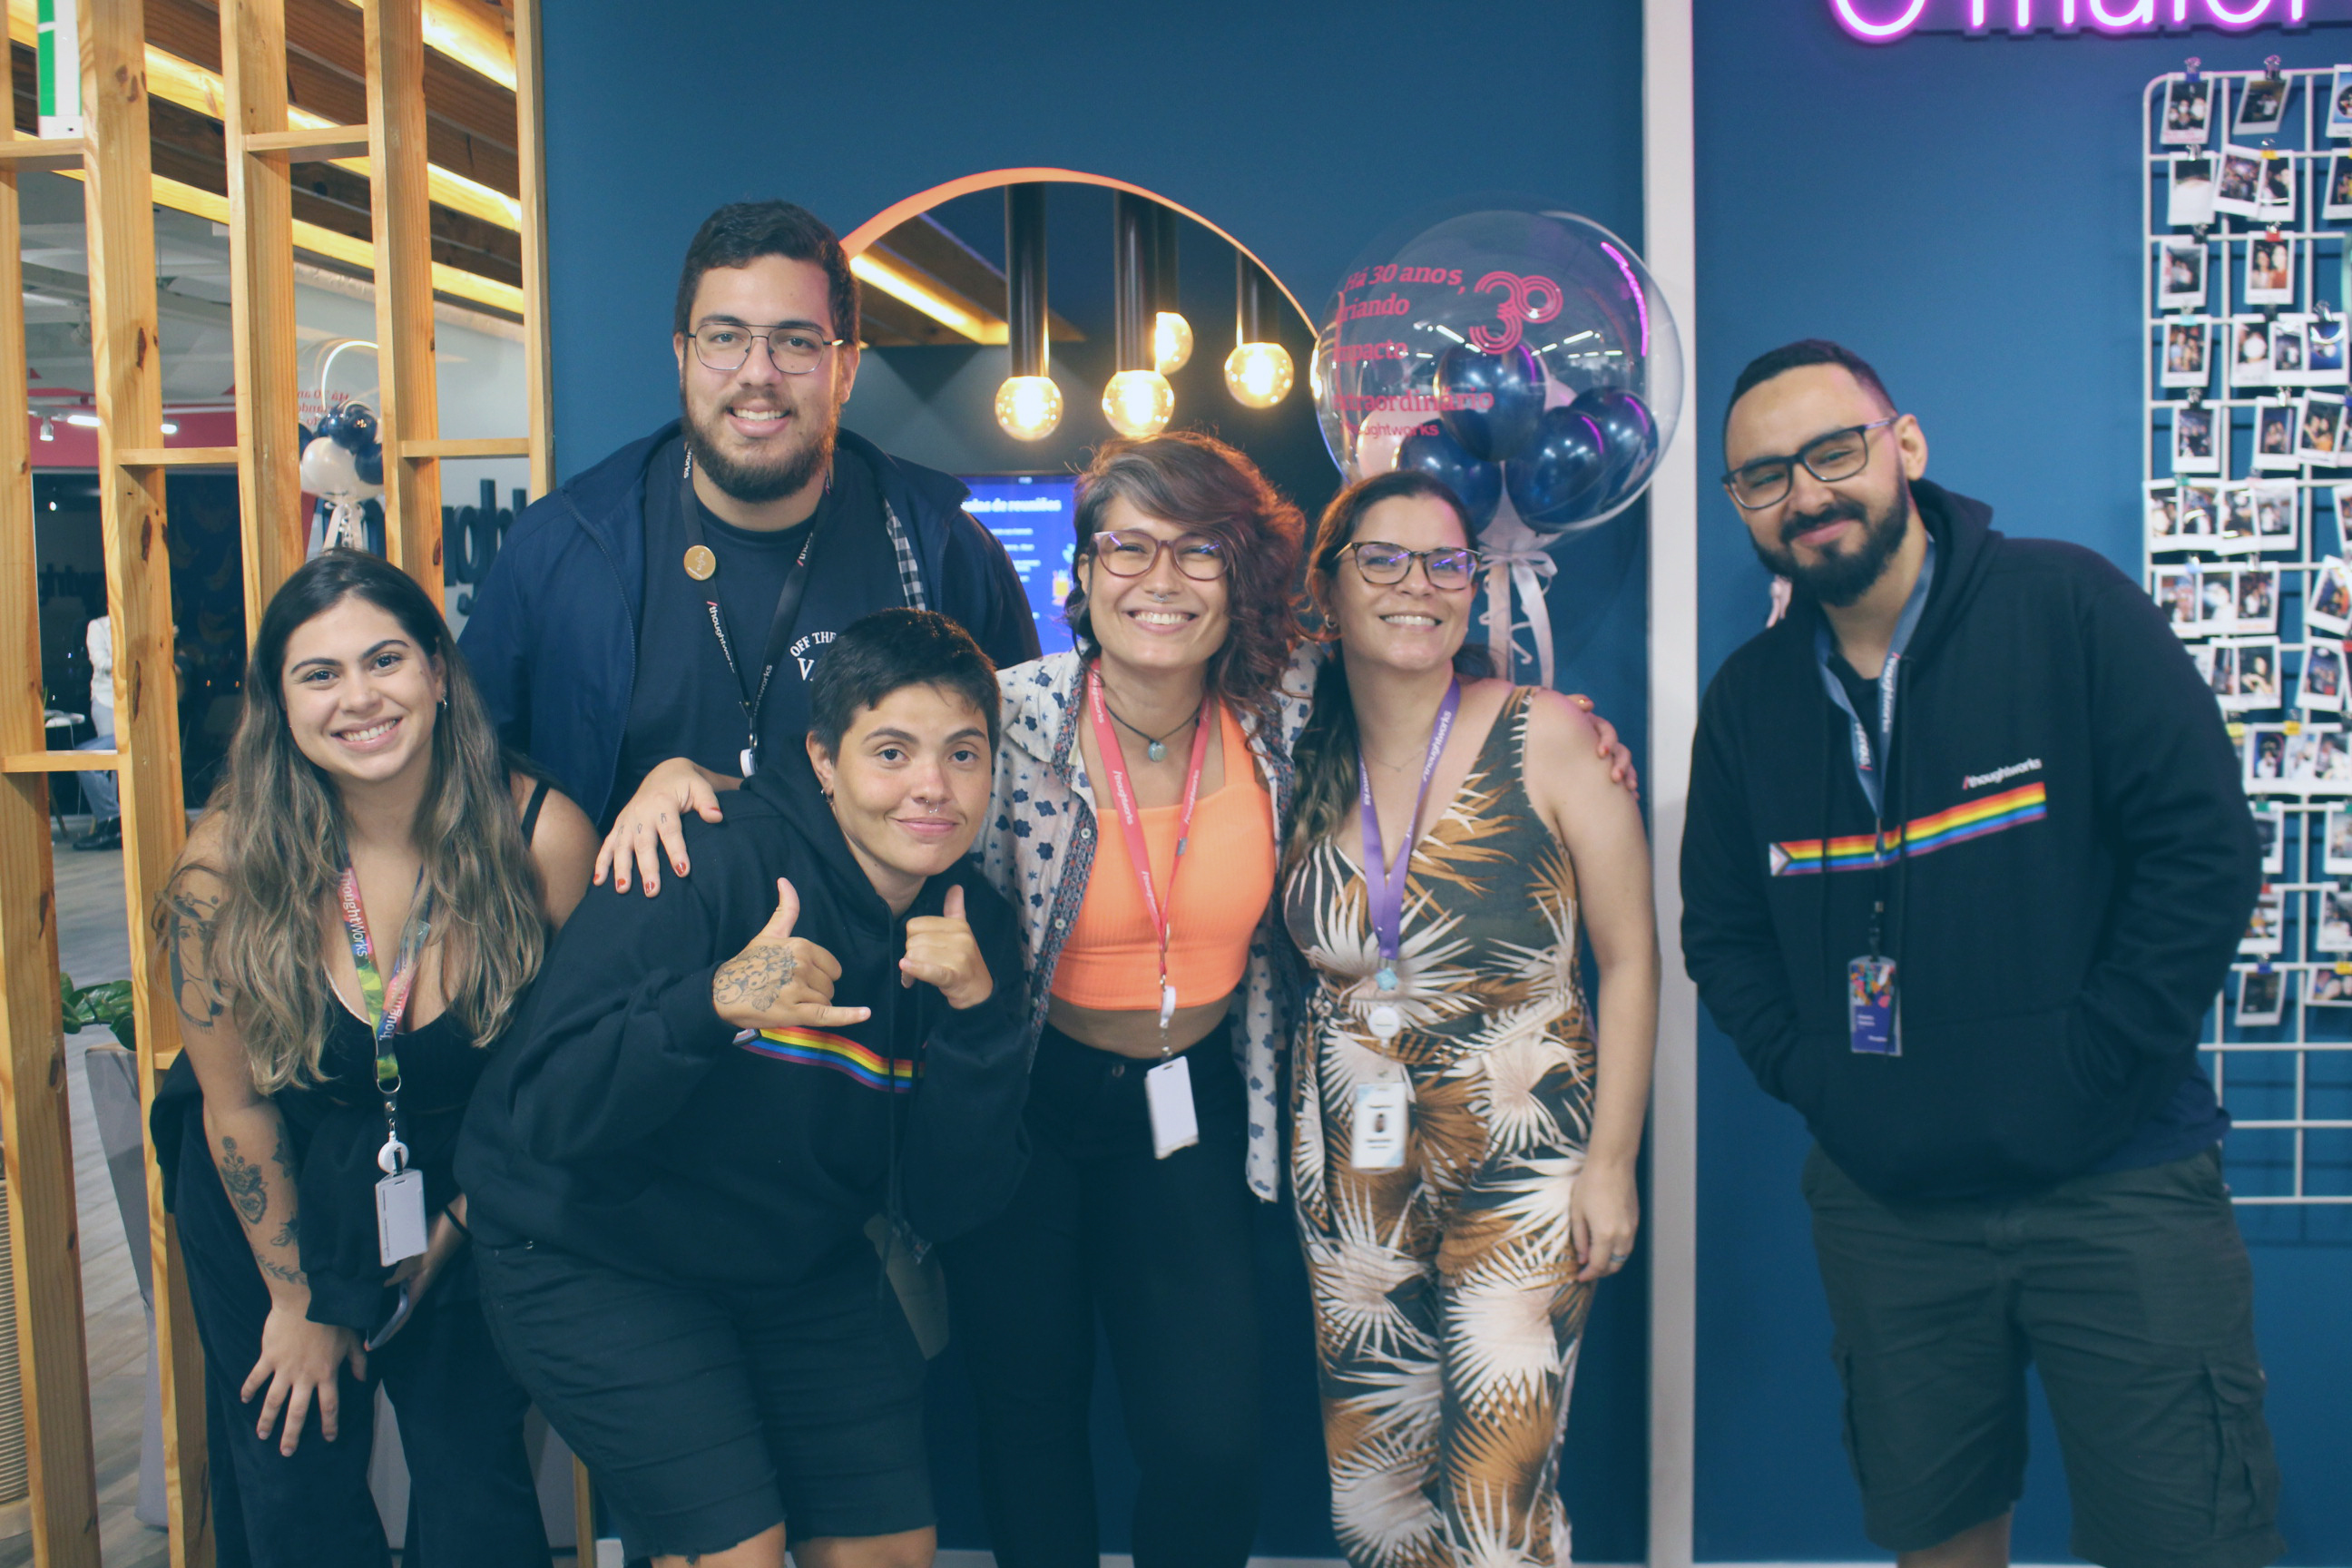 A group of 6 Thoughtworkers gathered and smiling for the photo, with the backdrop being the Thoughtworks office in Recife.